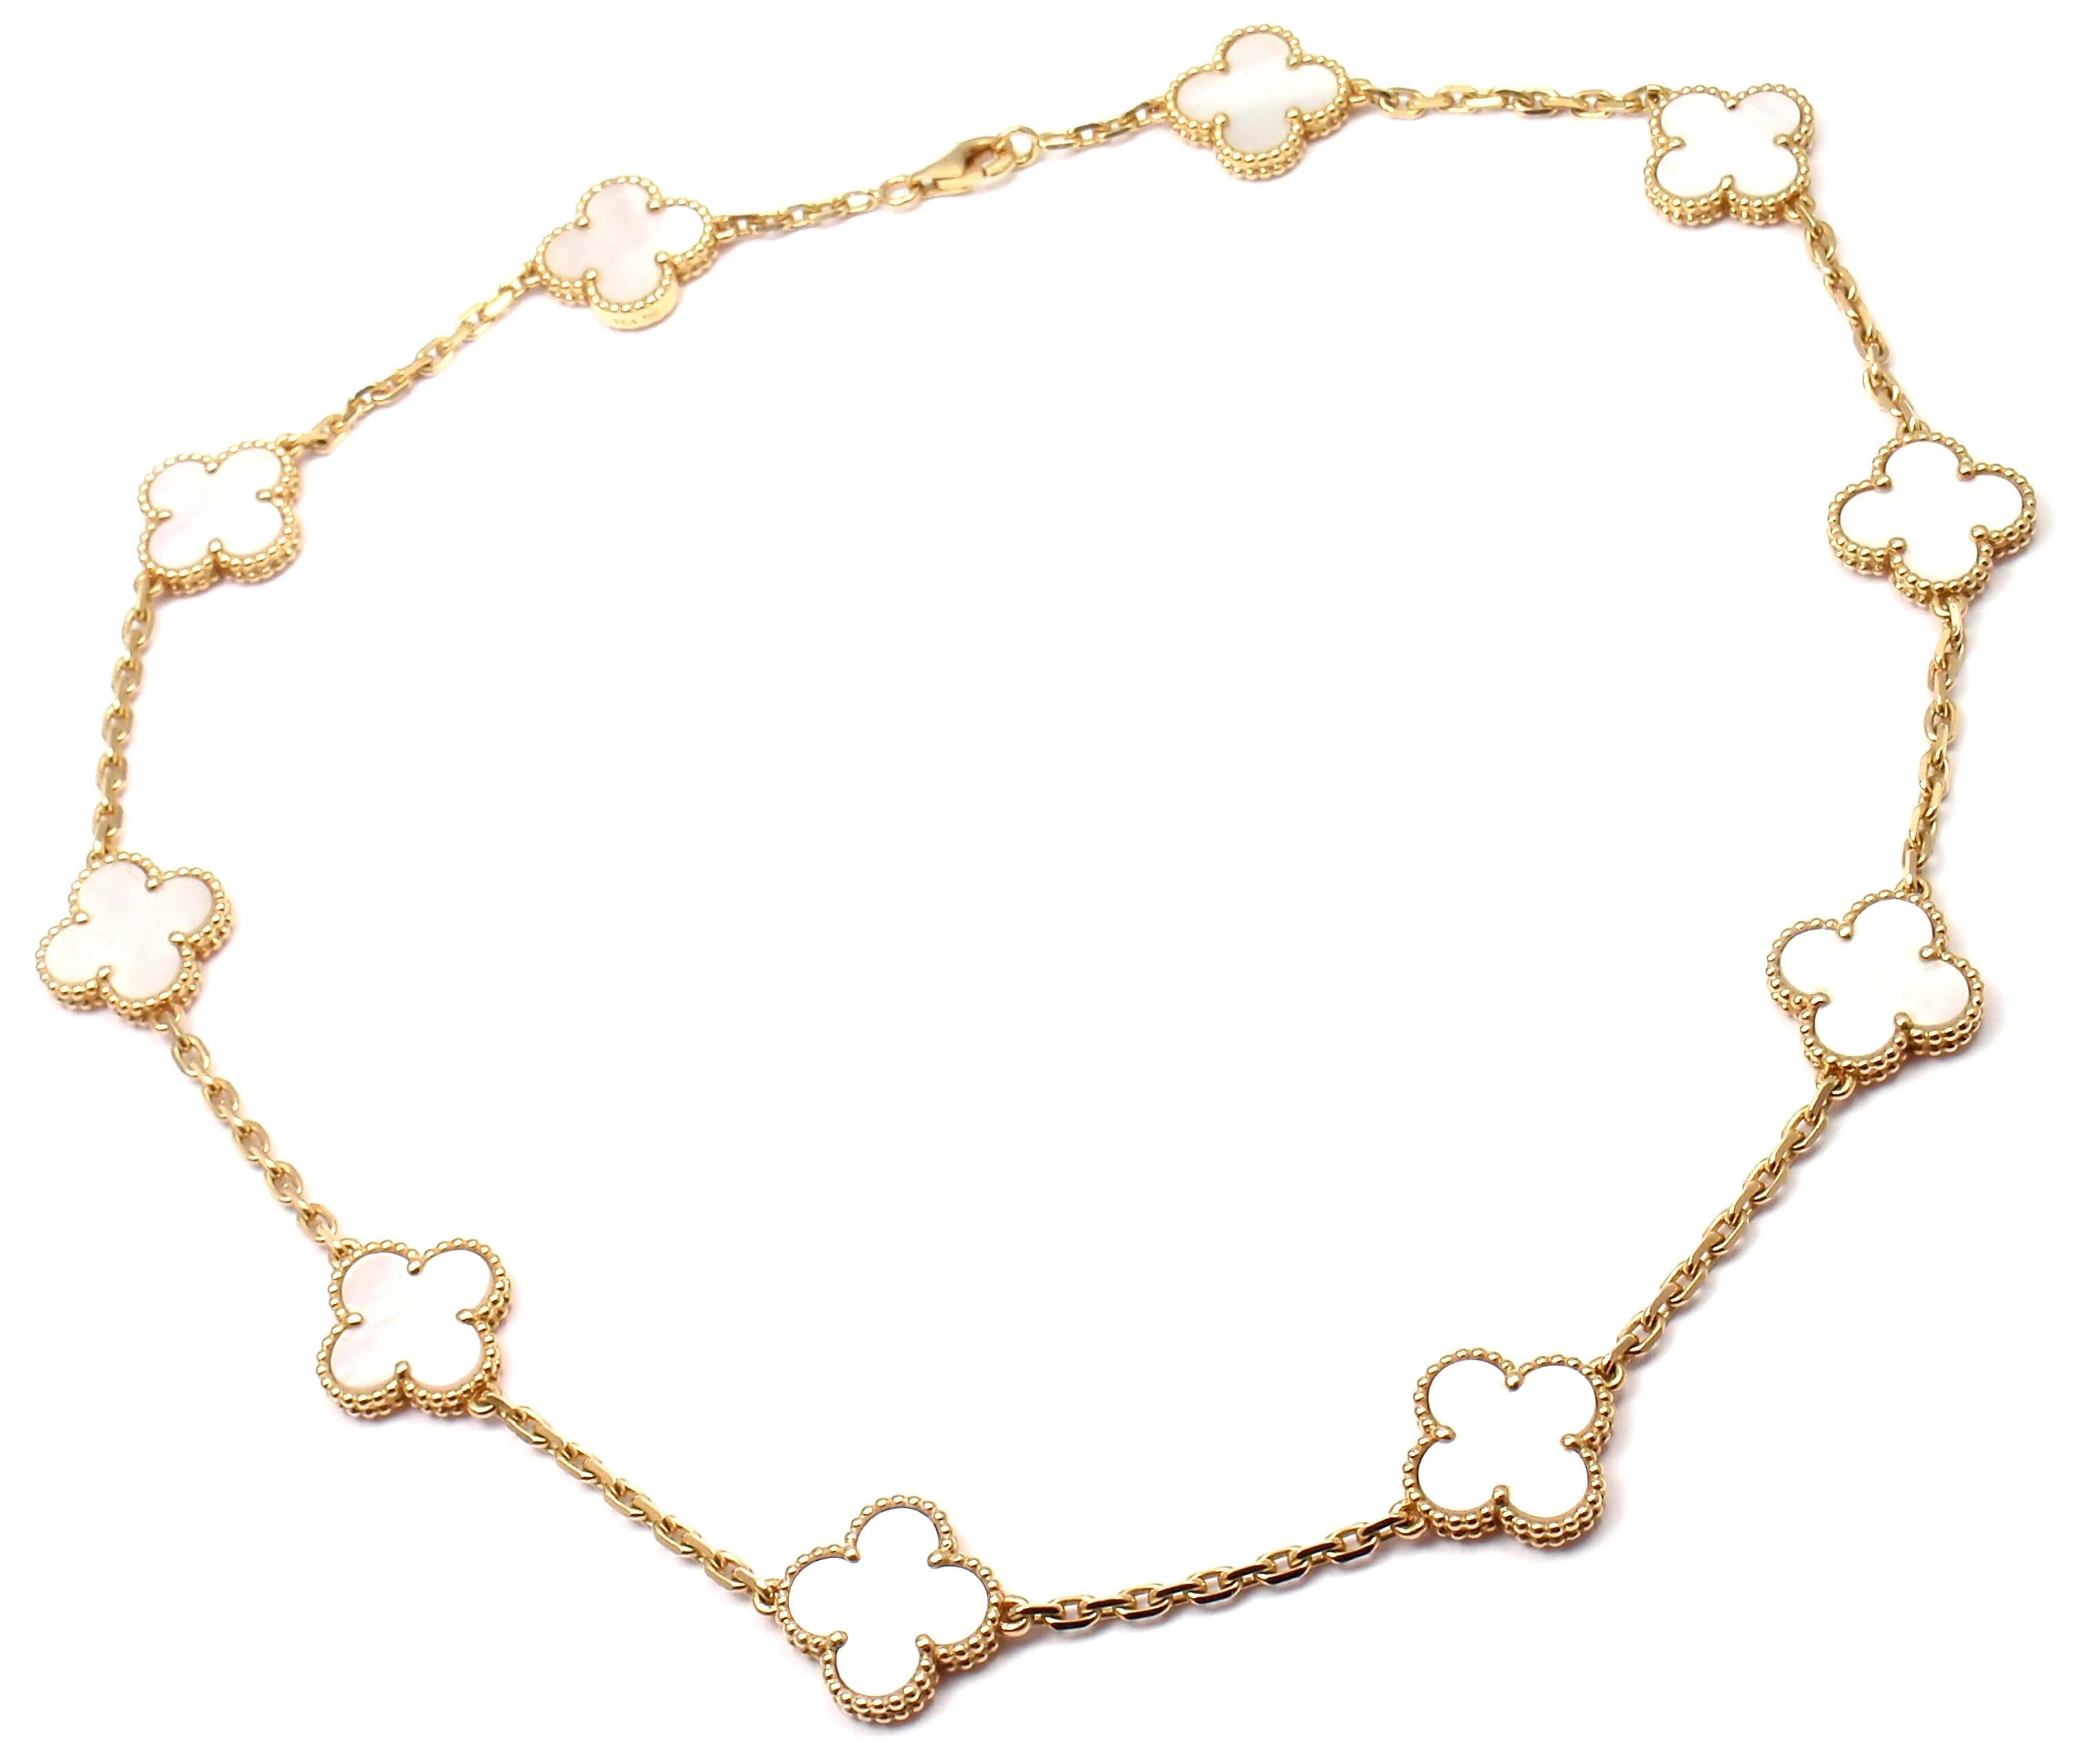 18k Yellow Gold Alhambra 10 Motifs Mother Of Pearl Necklace by
Van Cleef & Arpels.
With 10 motifs of mother of pearl Alhambra stones 15mm each

Details:
Length: 16.5